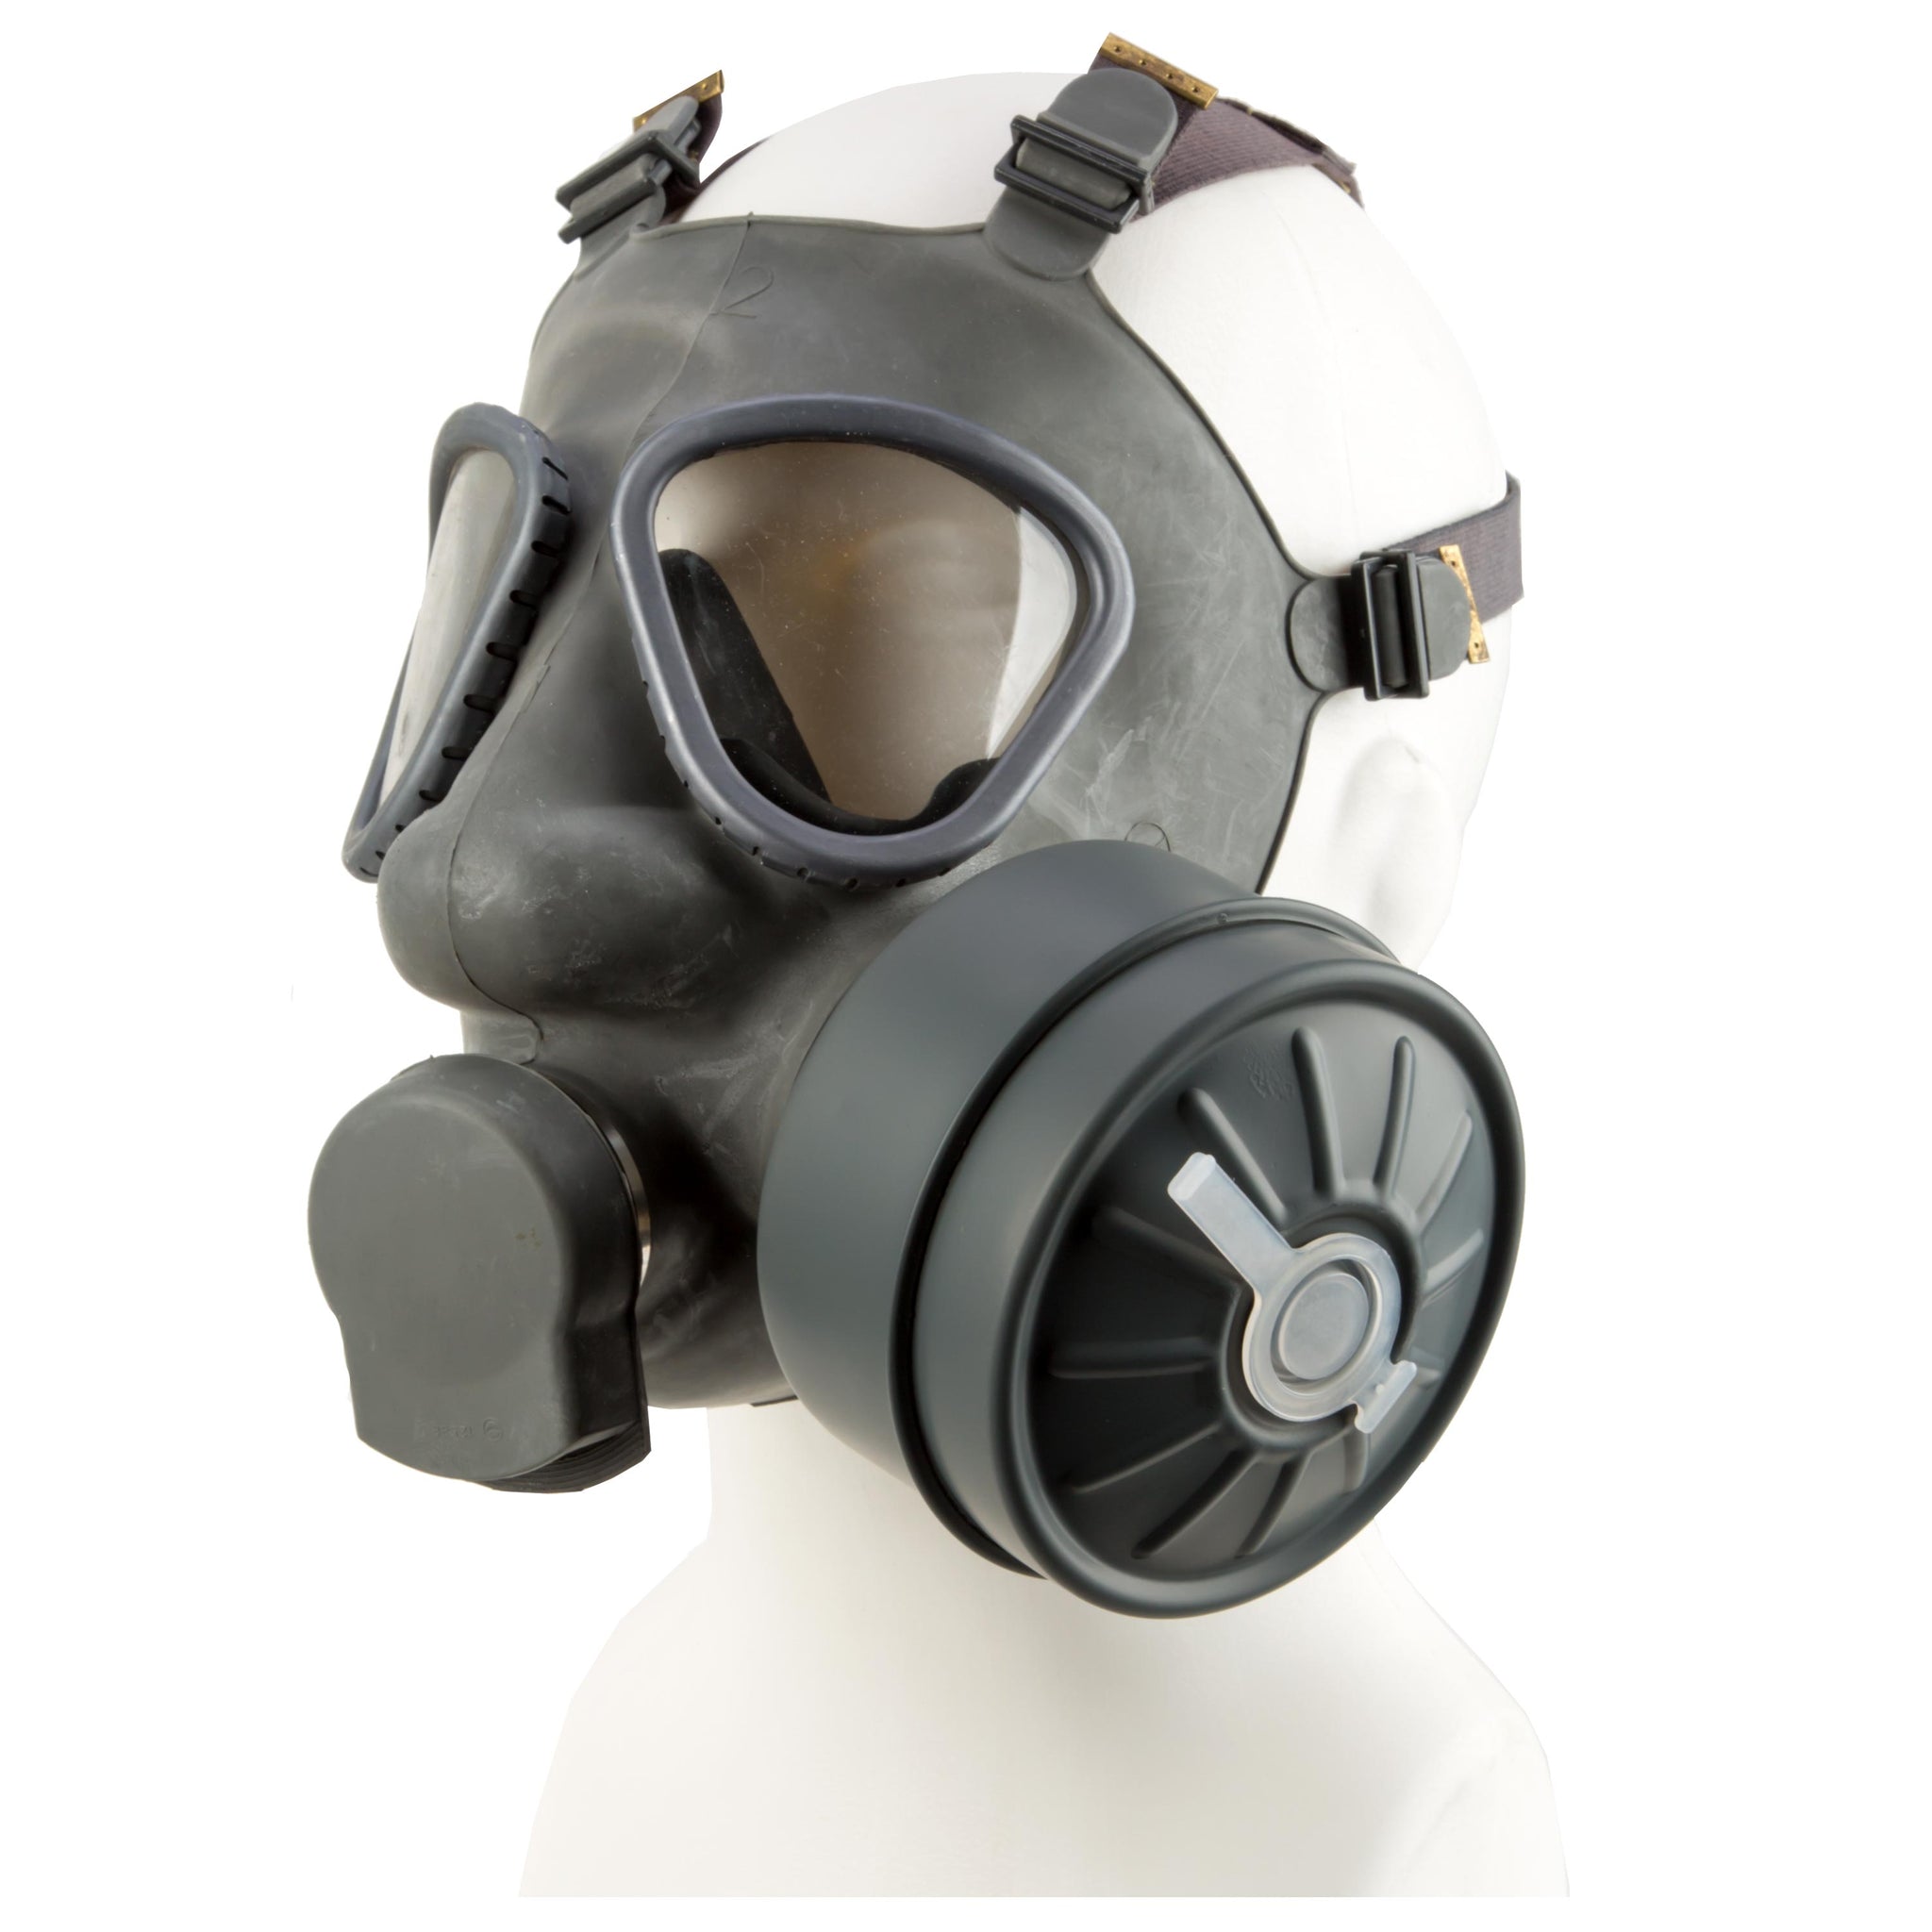 USED V2 Finnish Military M61 Gas Mask NBC w/60MM Filter SUOD 61